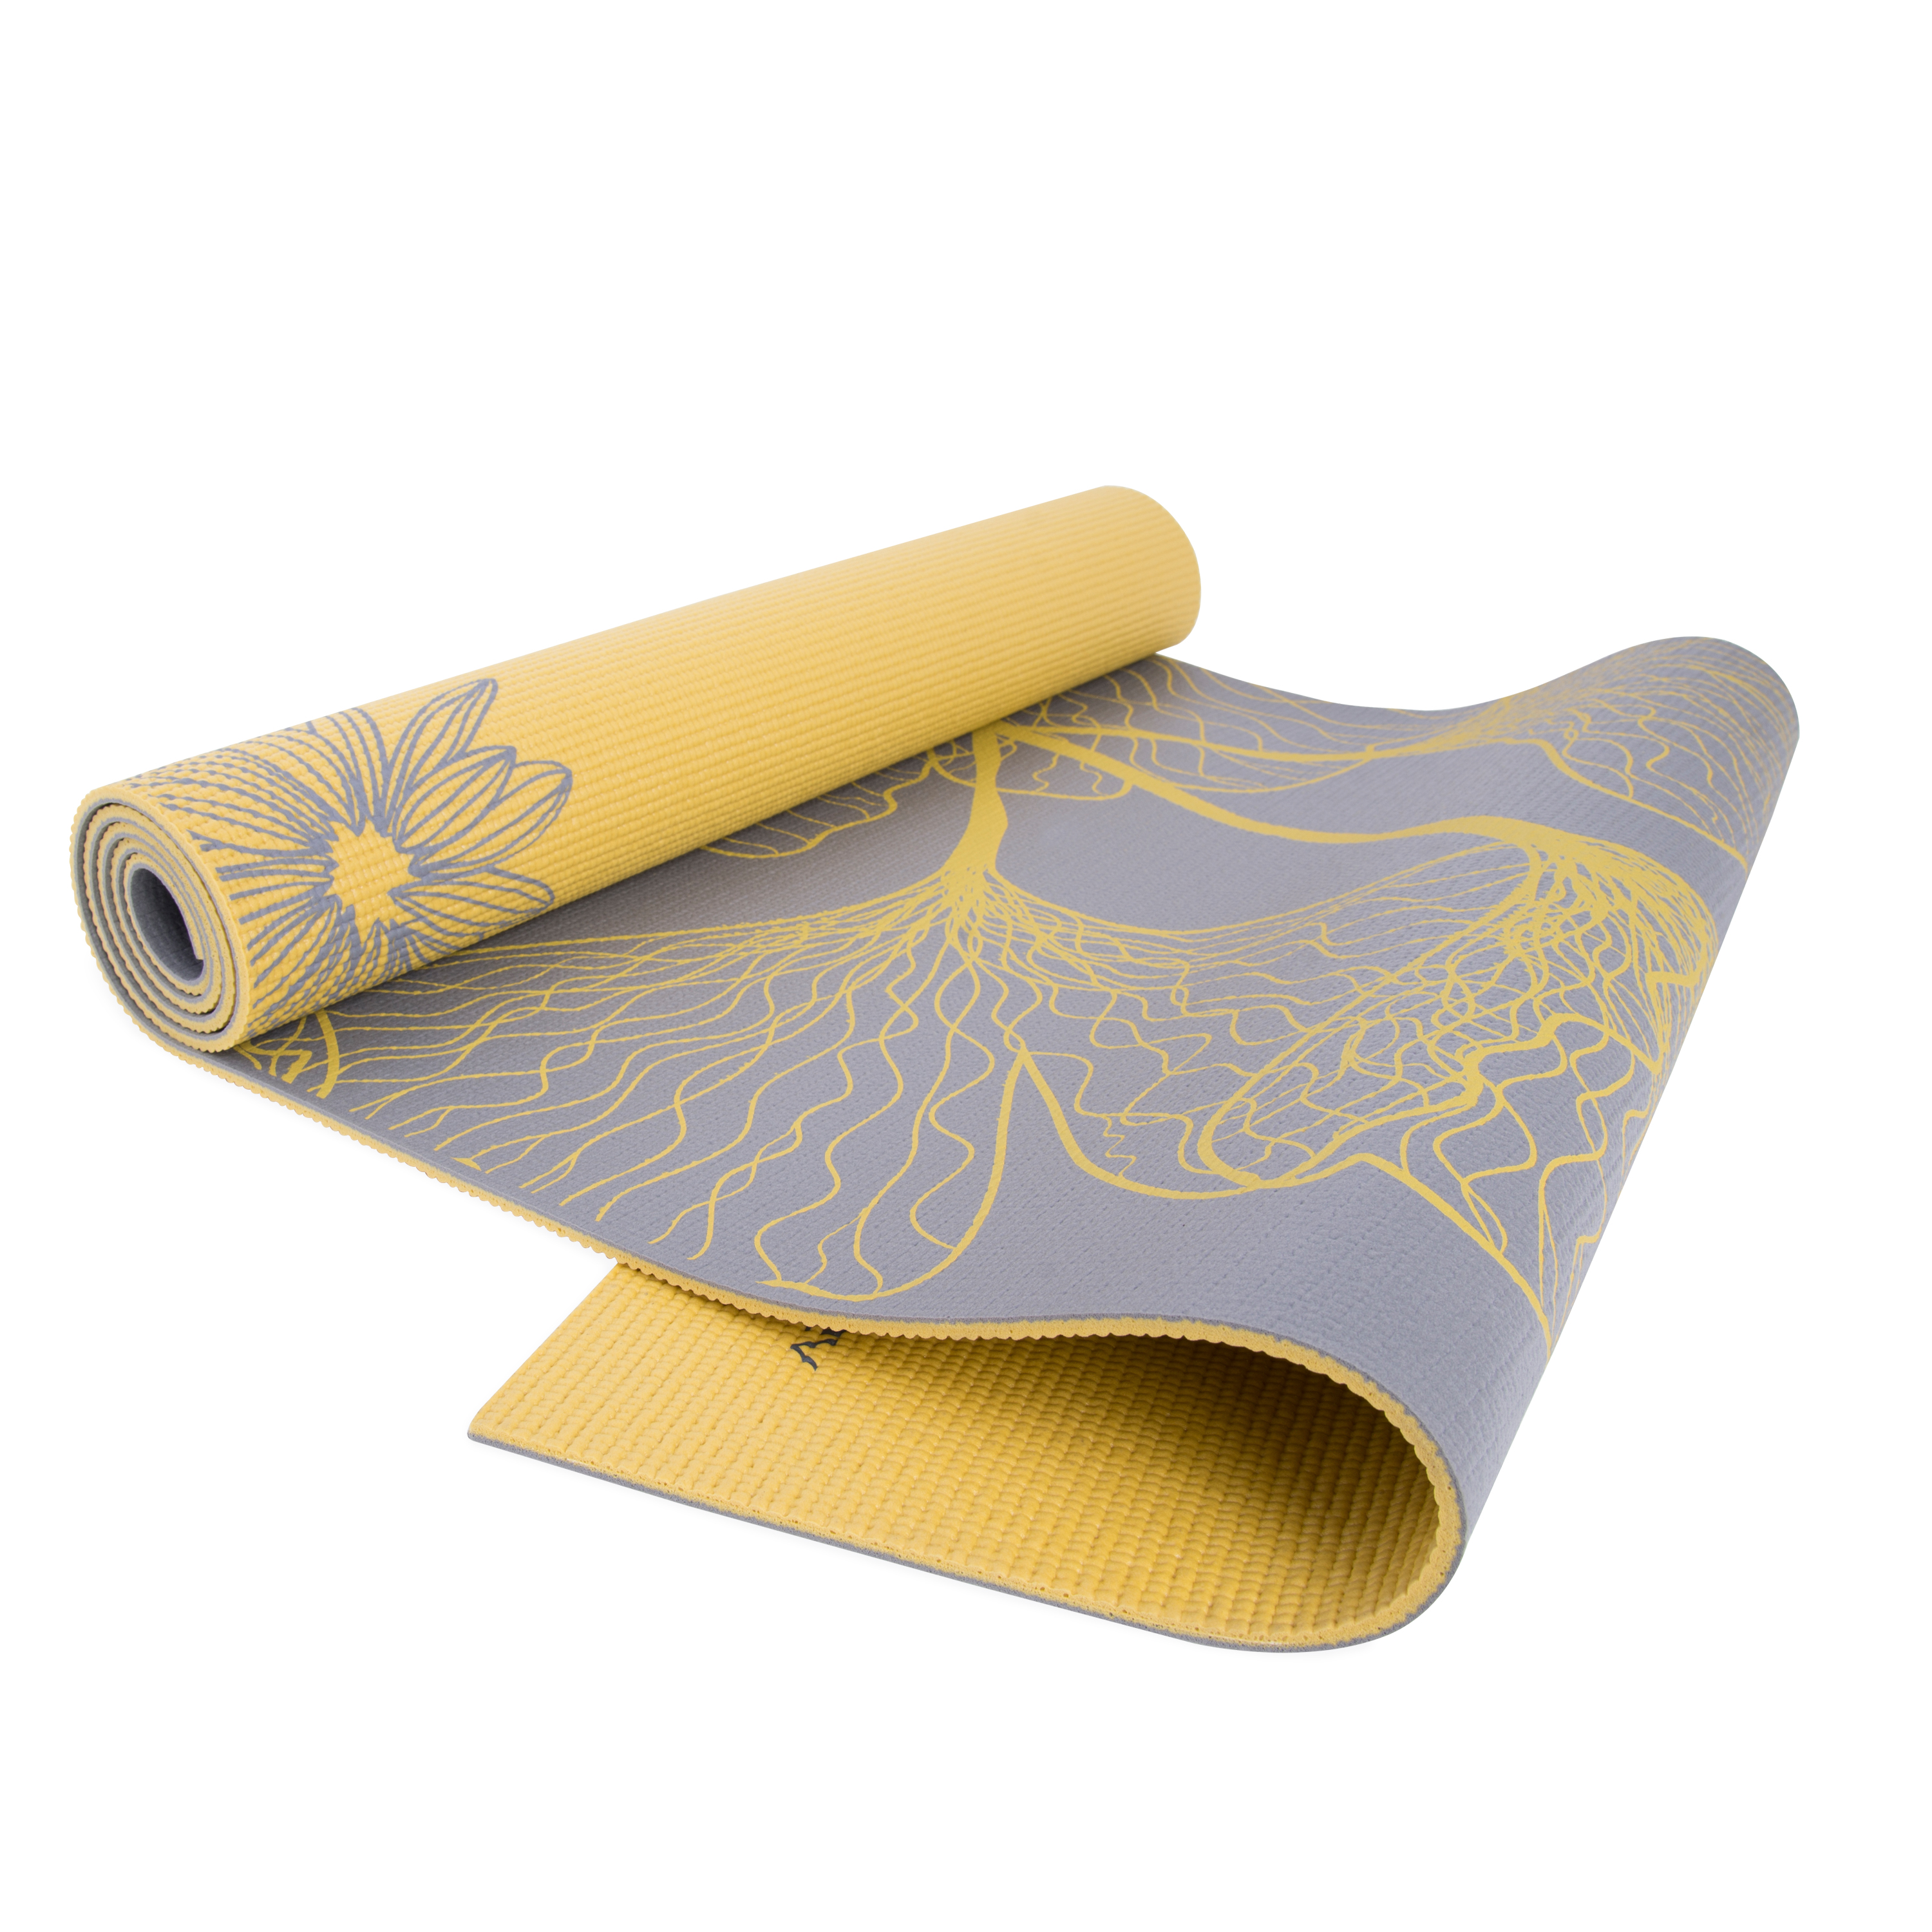 CAP Yoga Reversible Yoga Mat, 5mm with Carry Strap, Dahlia and Ginkgo - image 1 of 5